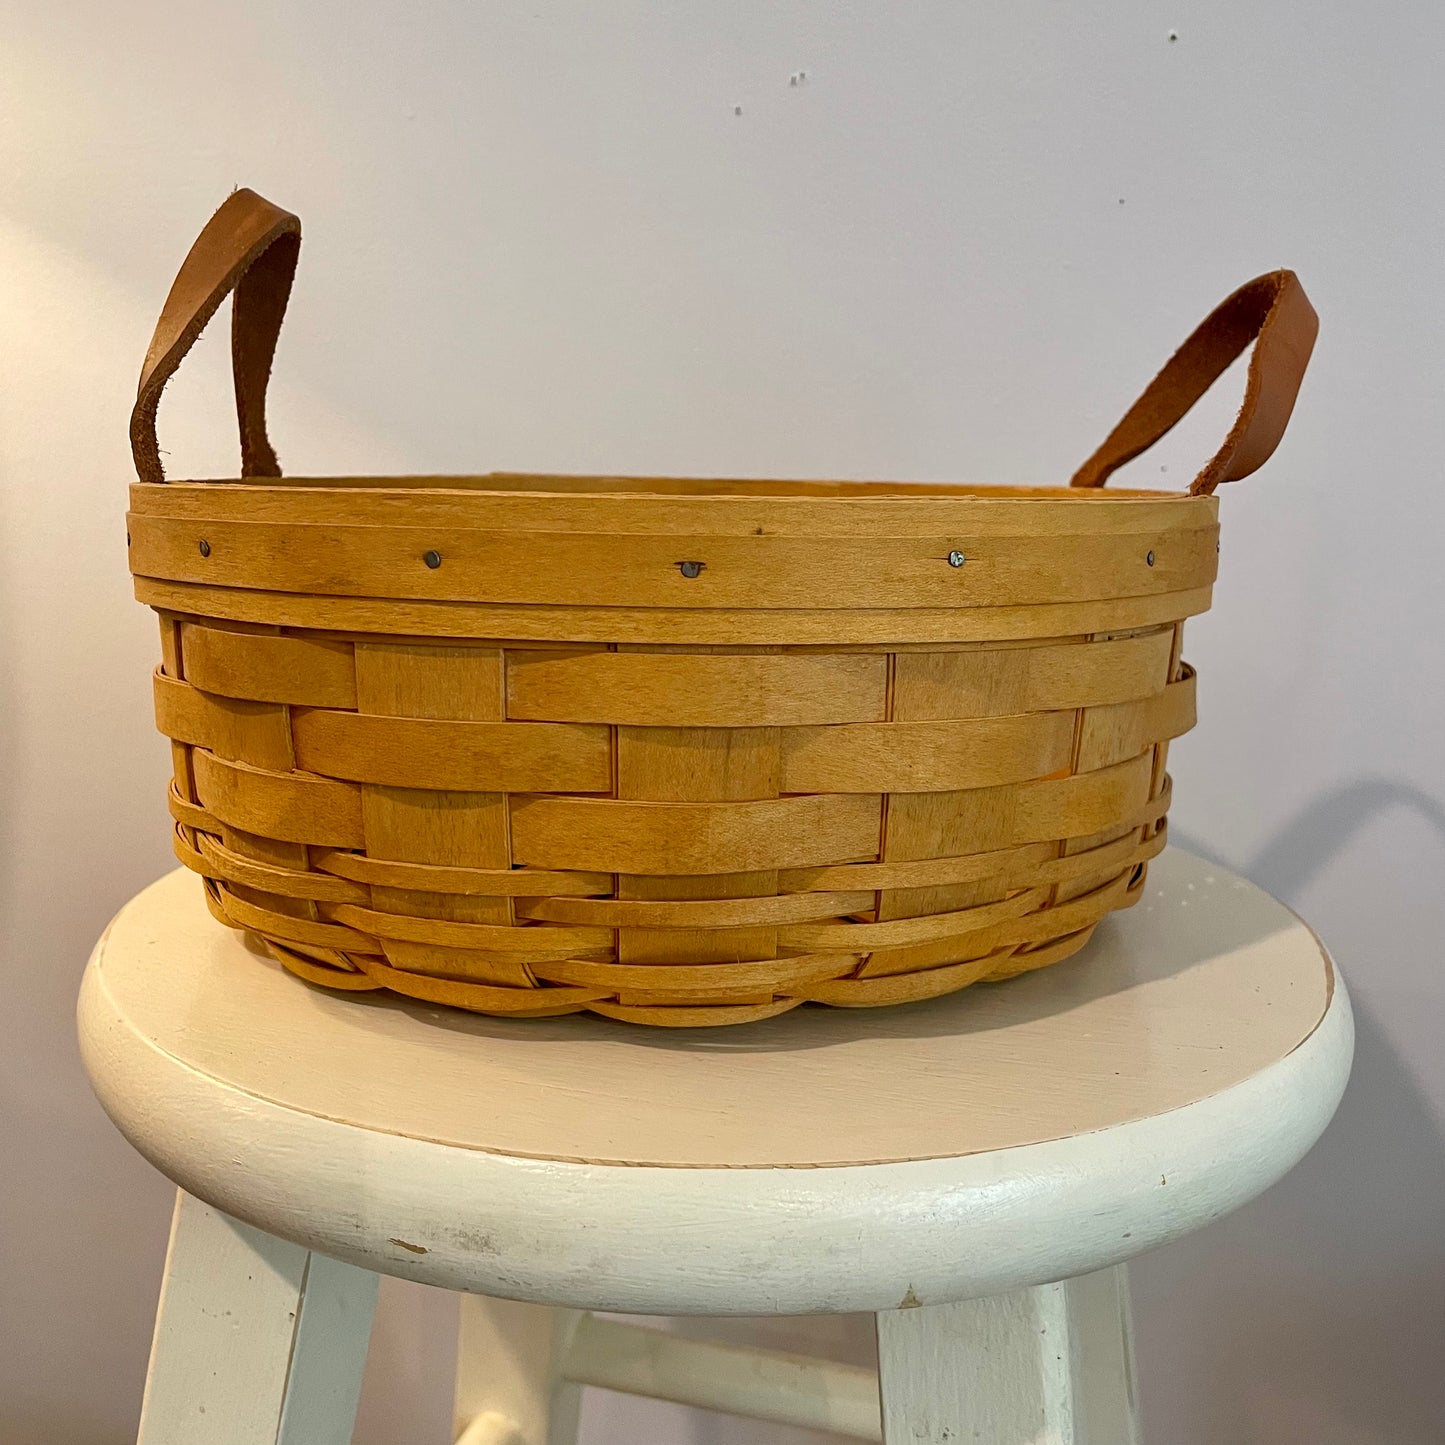 1999 Longaberger 9.5” Round Picnic Basket with Leather Handles